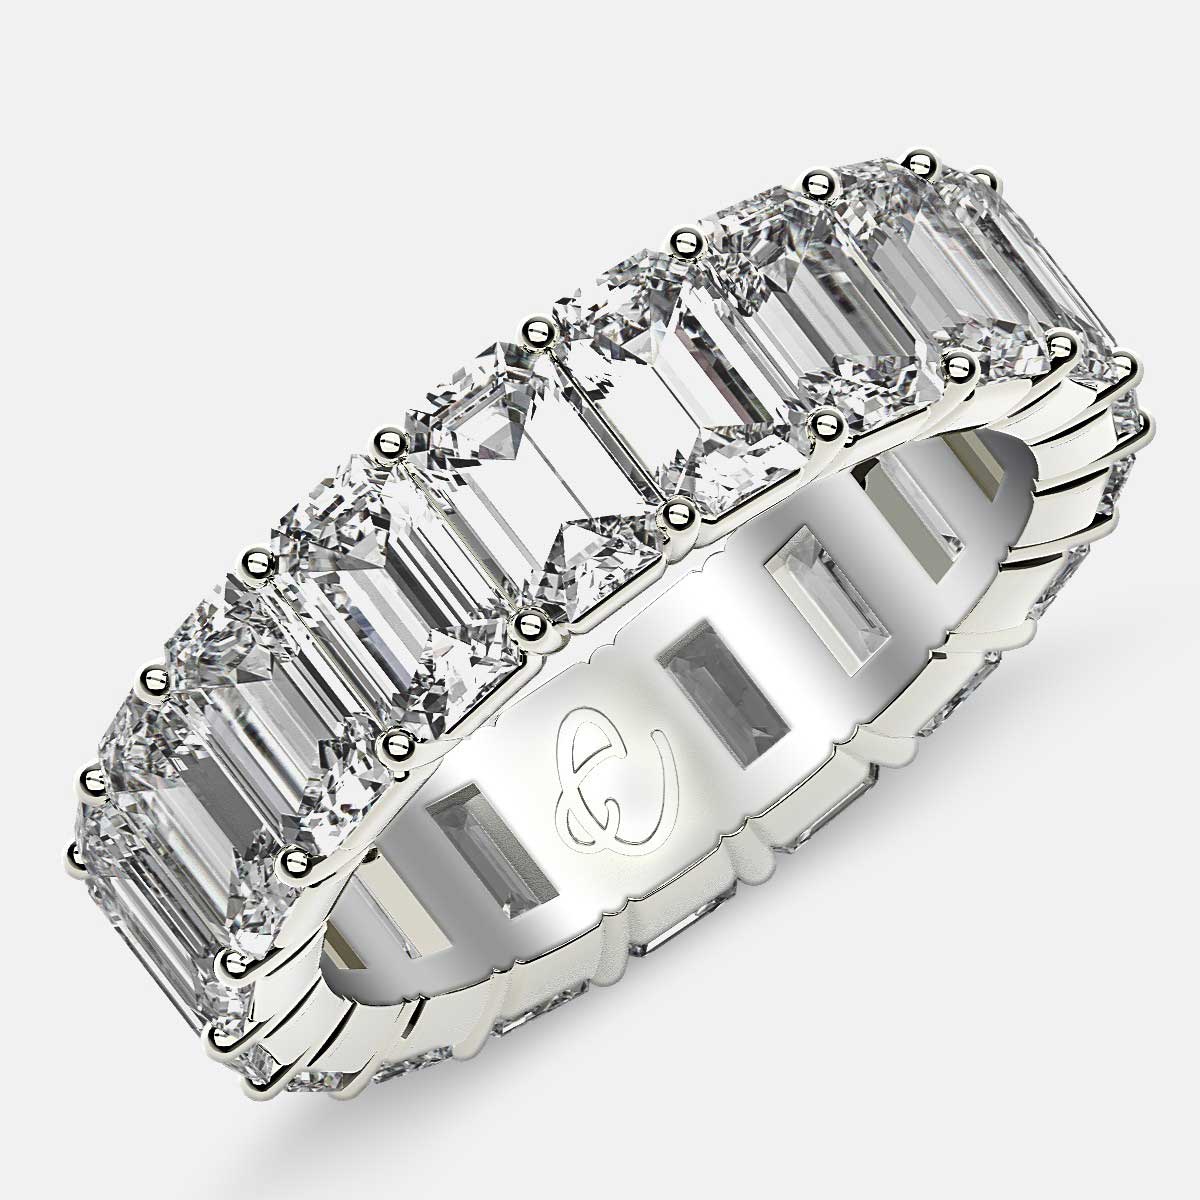 Classic Eternity Ring with Emerald Cut Diamonds in 18k White Gold